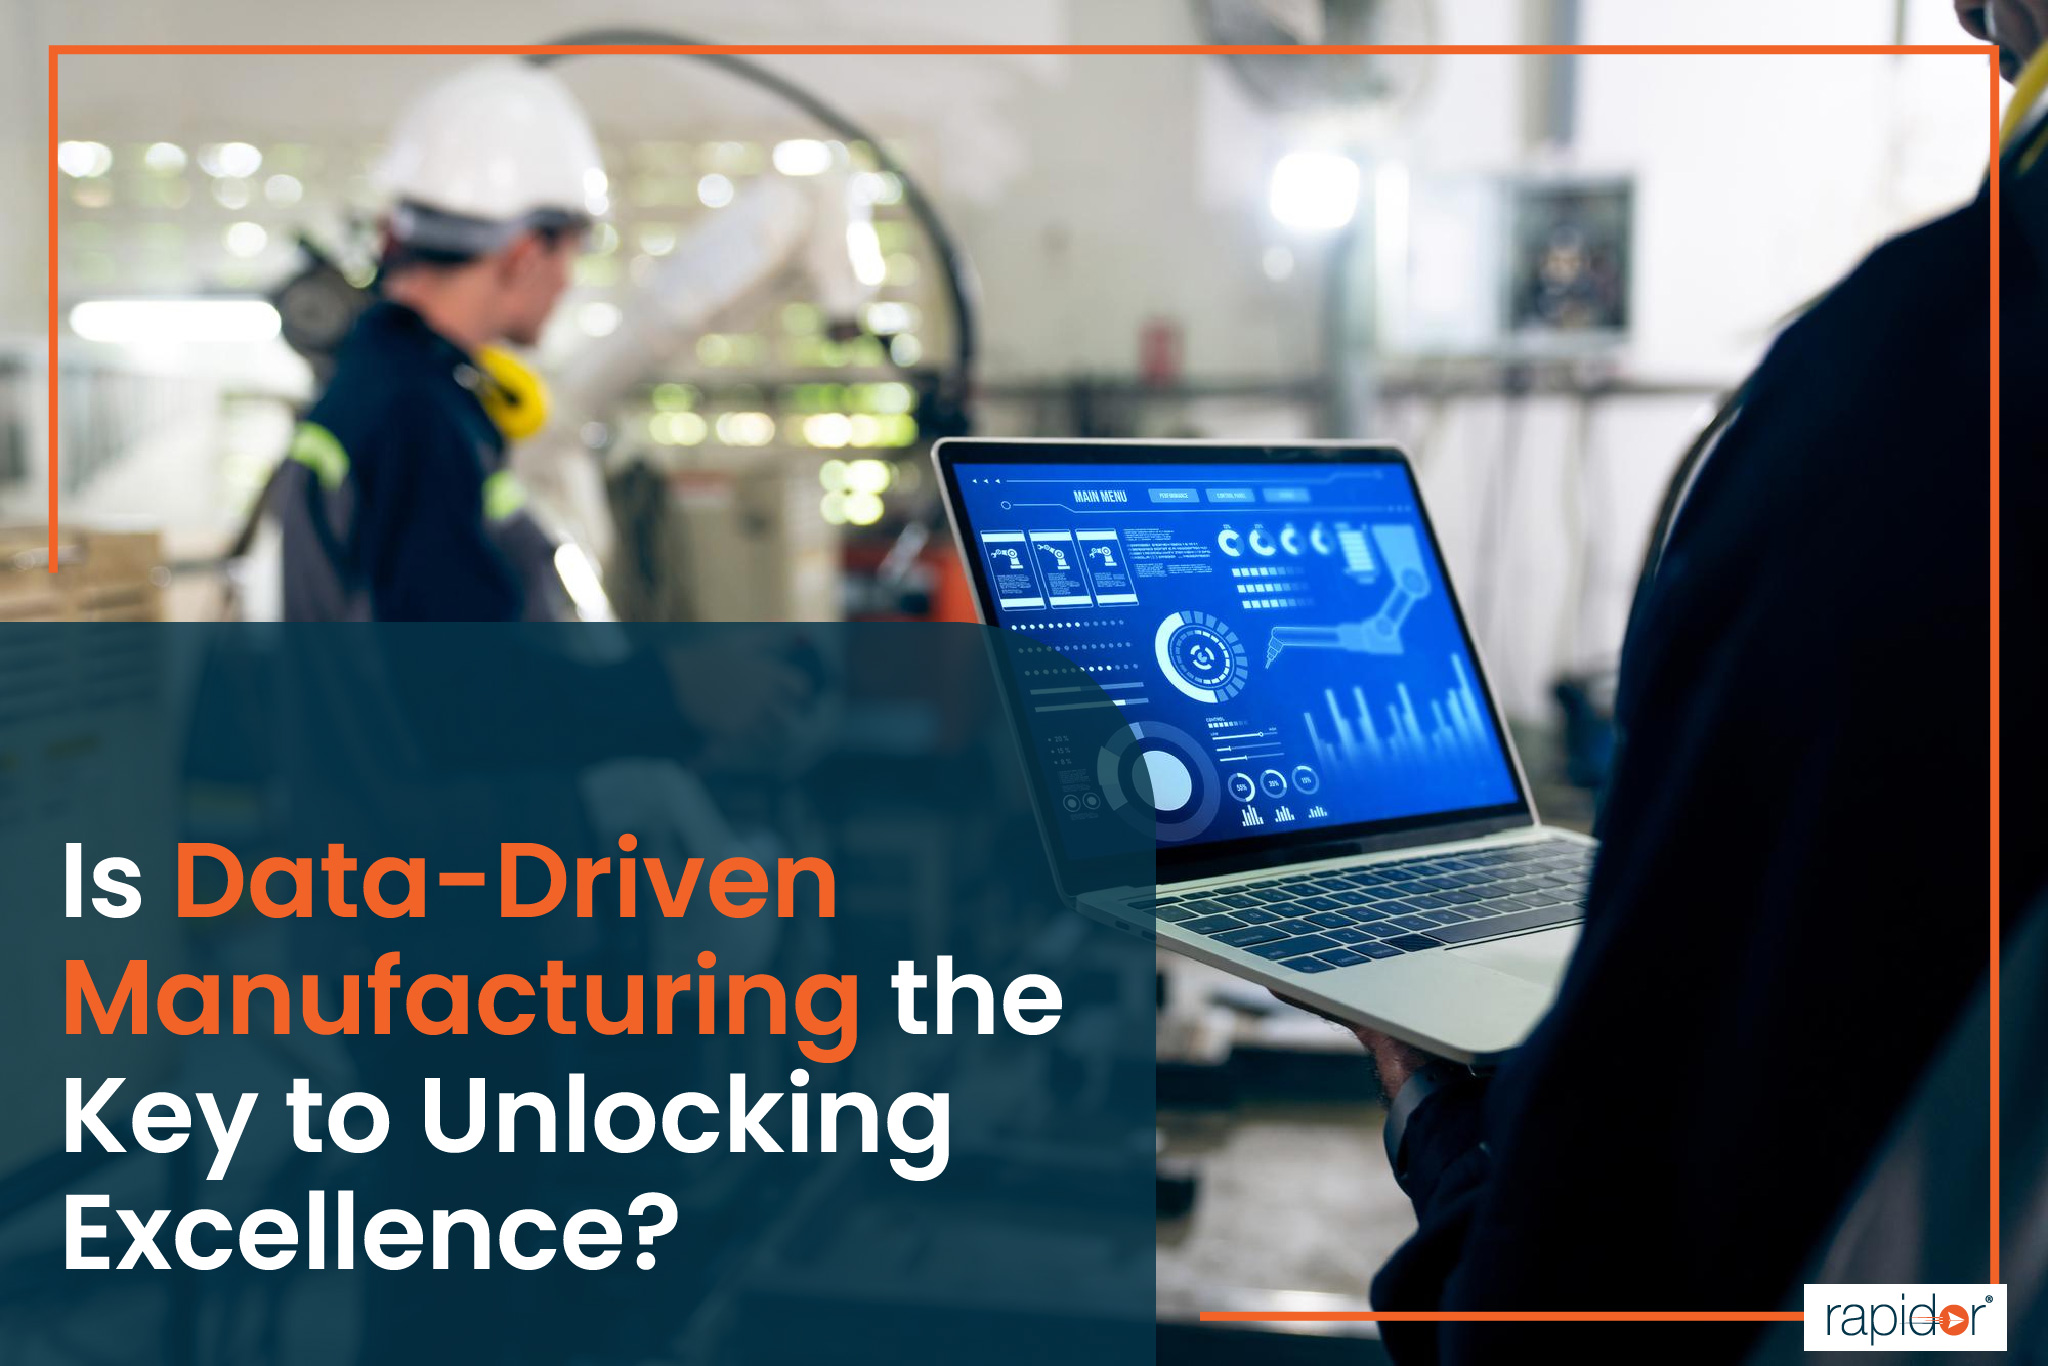 Is Data-Driven Manufacturing the Key to Unlocking Excellence?